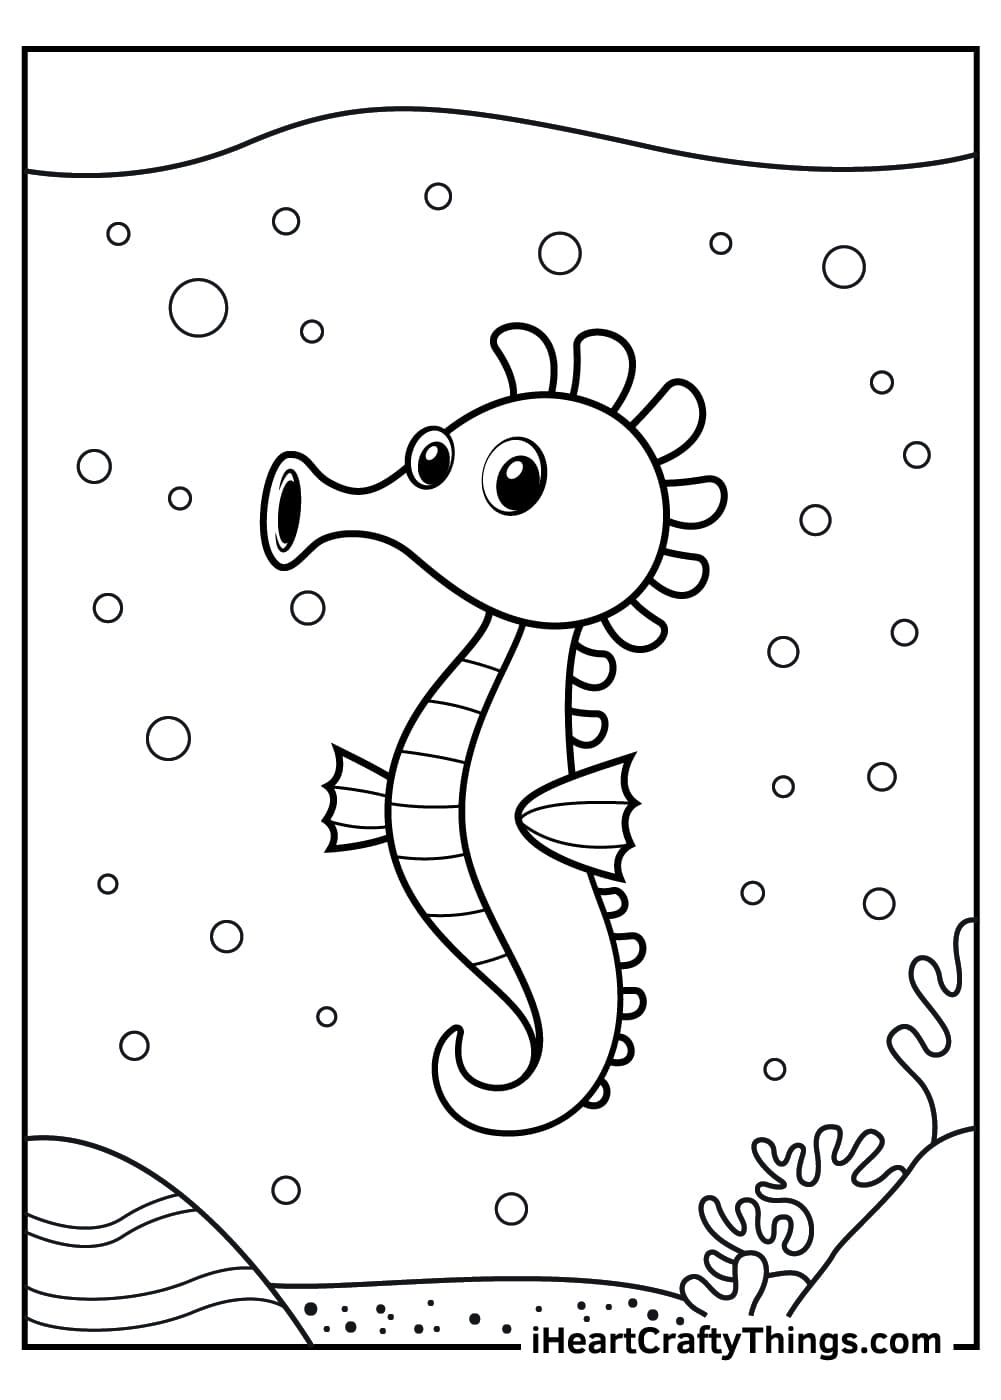 Seahorse For Kids Image Coloring Page